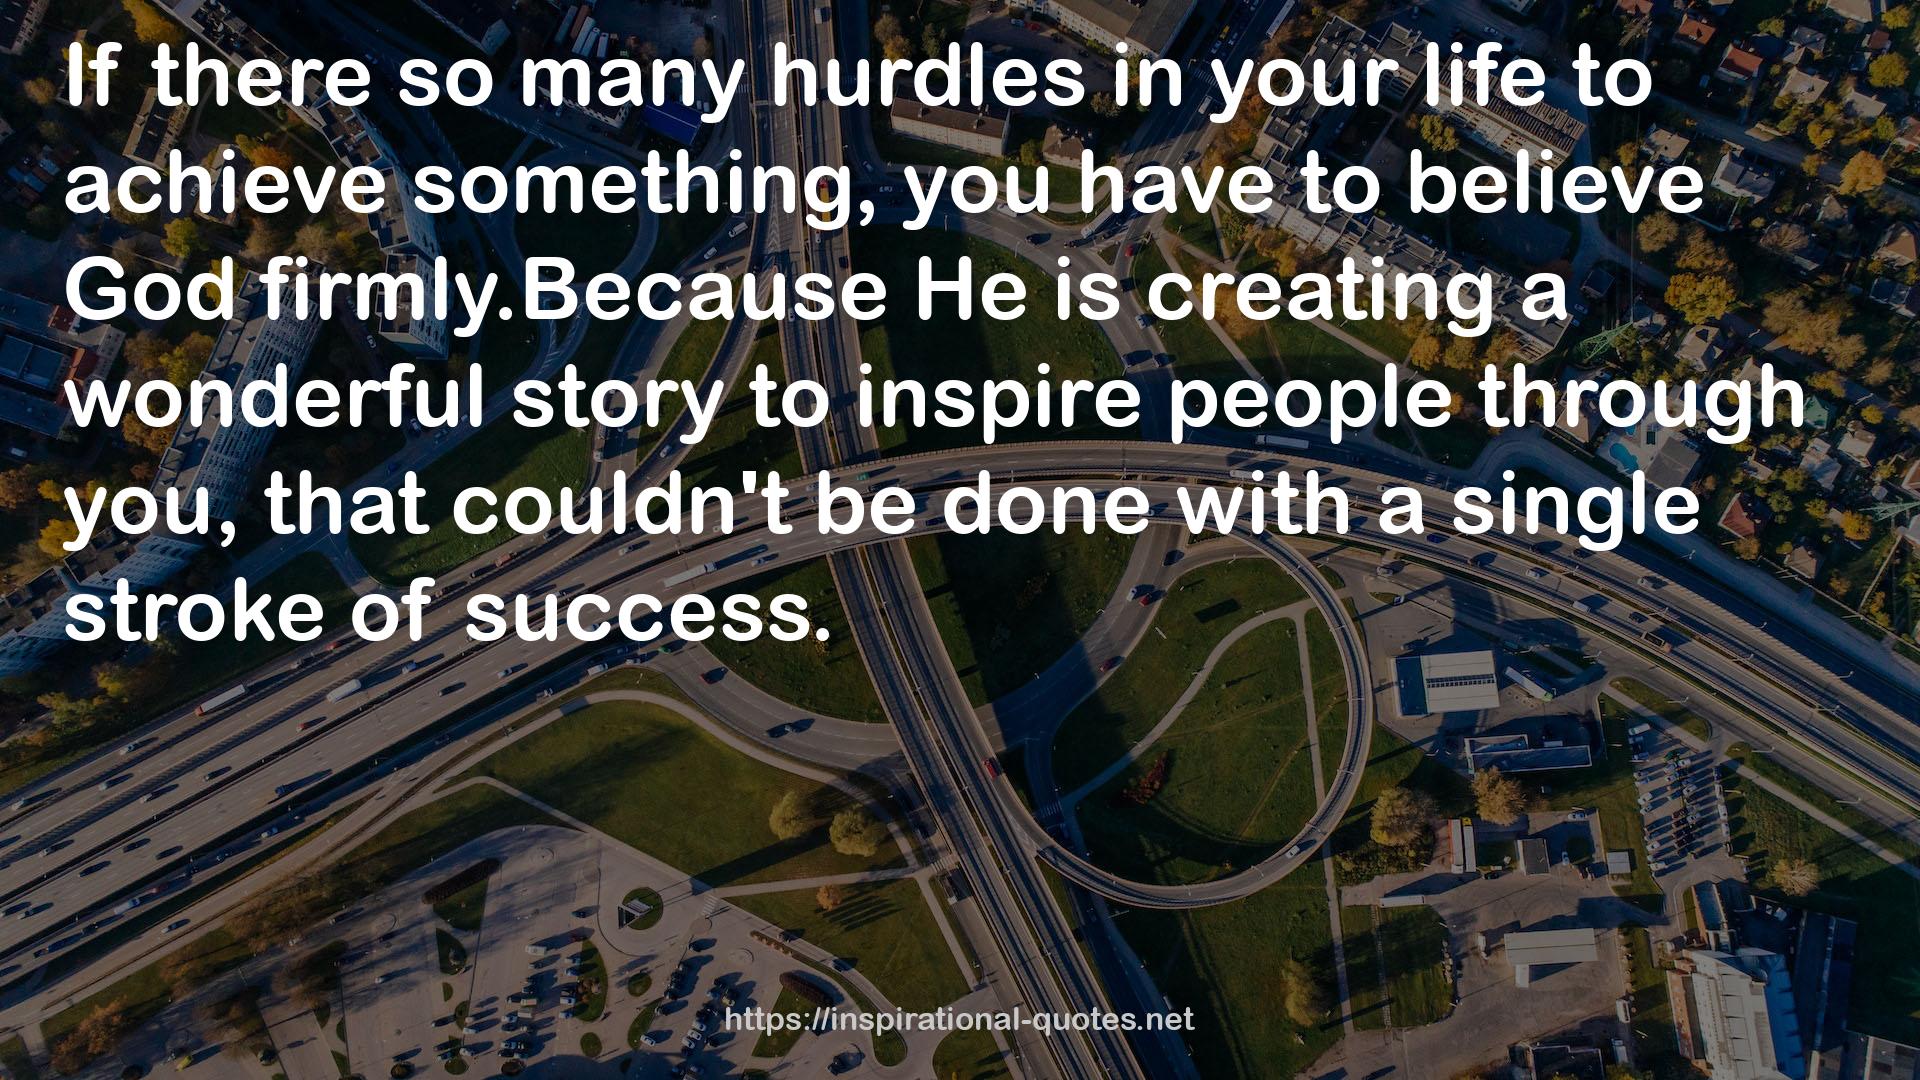  quote : If there so many hurdles in your life to achieve something, you have to believe God firmly.Because He is creating a wonderful story to inspire people through you, that couldn't be done with a single stroke of success.